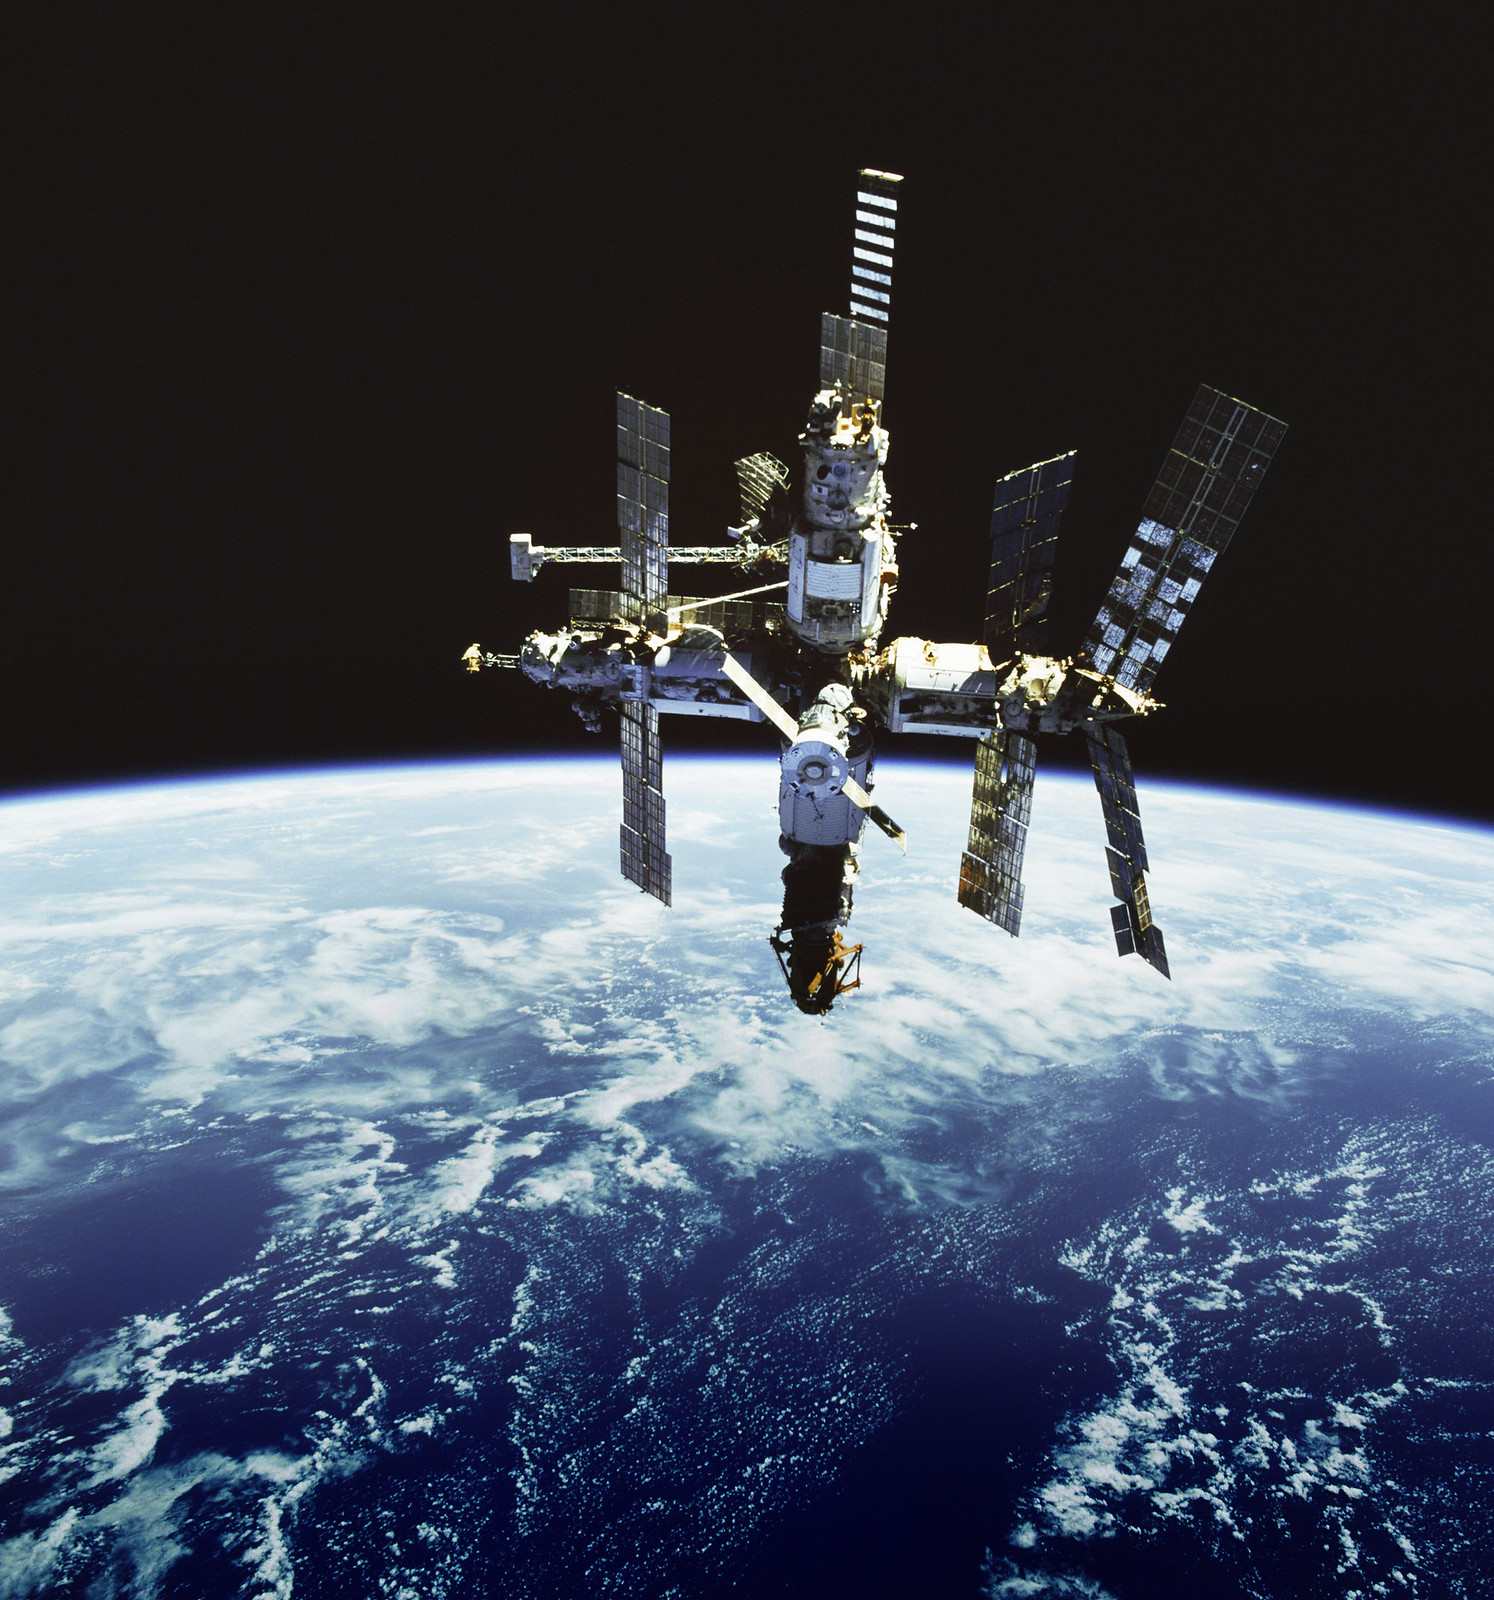 Mir space station with Earth in the background.